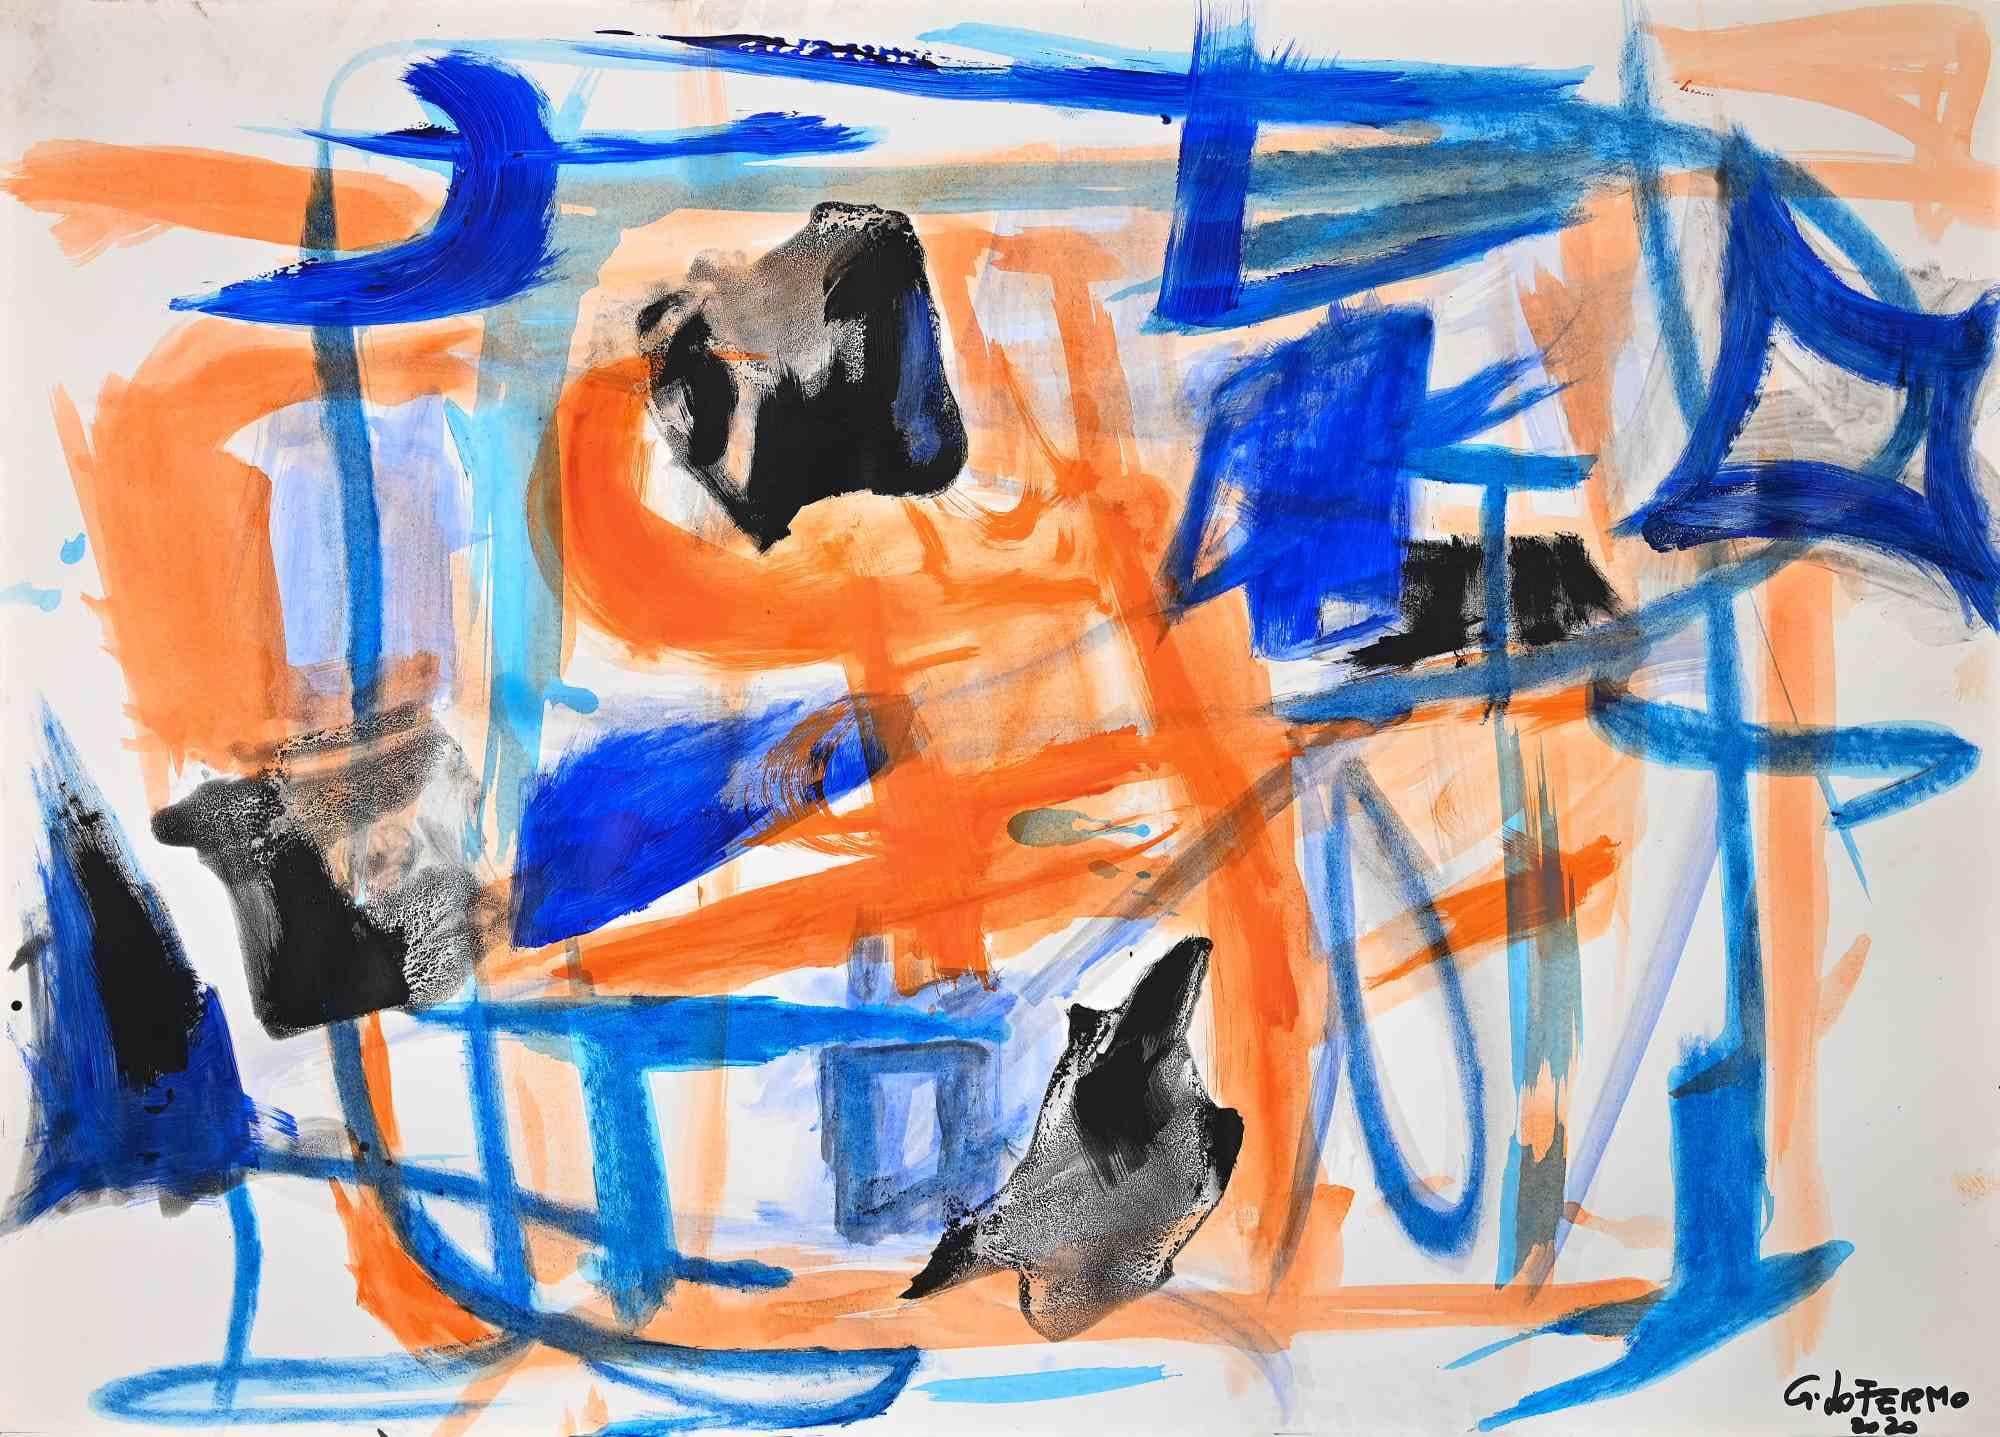 Abstract Composition is an original drawing in Tempera and Watercolor on paper realized by Giorgio Lo Fermo in 2020.

Good Conditions.

The Artwork is Depicted through strong strokes in a well-balanced composition.

Giorgio Lo Fermo  is an Italian